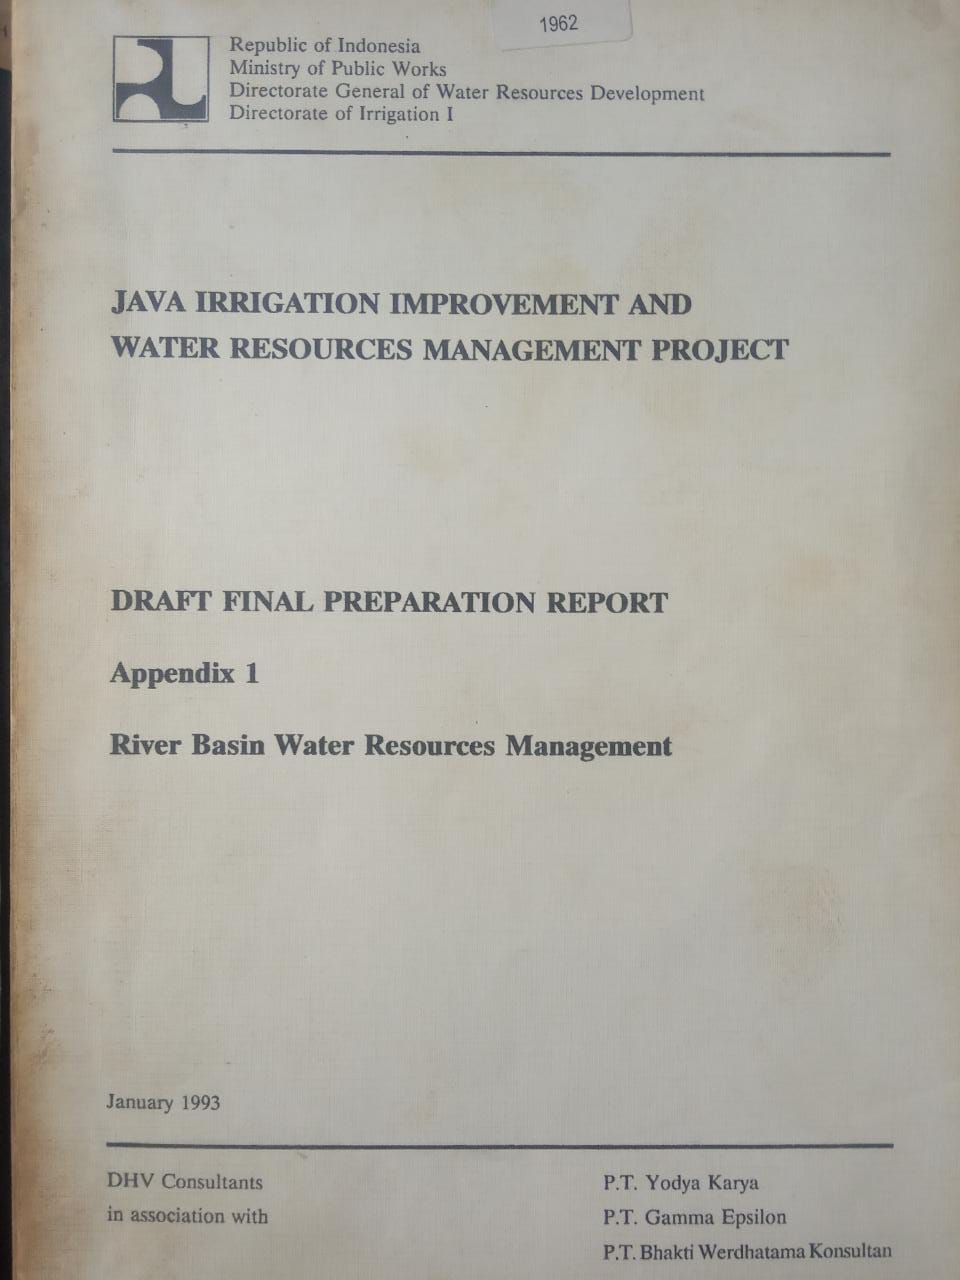 JAVA IRRIGATION IMPROVEMENT AND WATER RESOURCES MANAGEMENT PROJECT